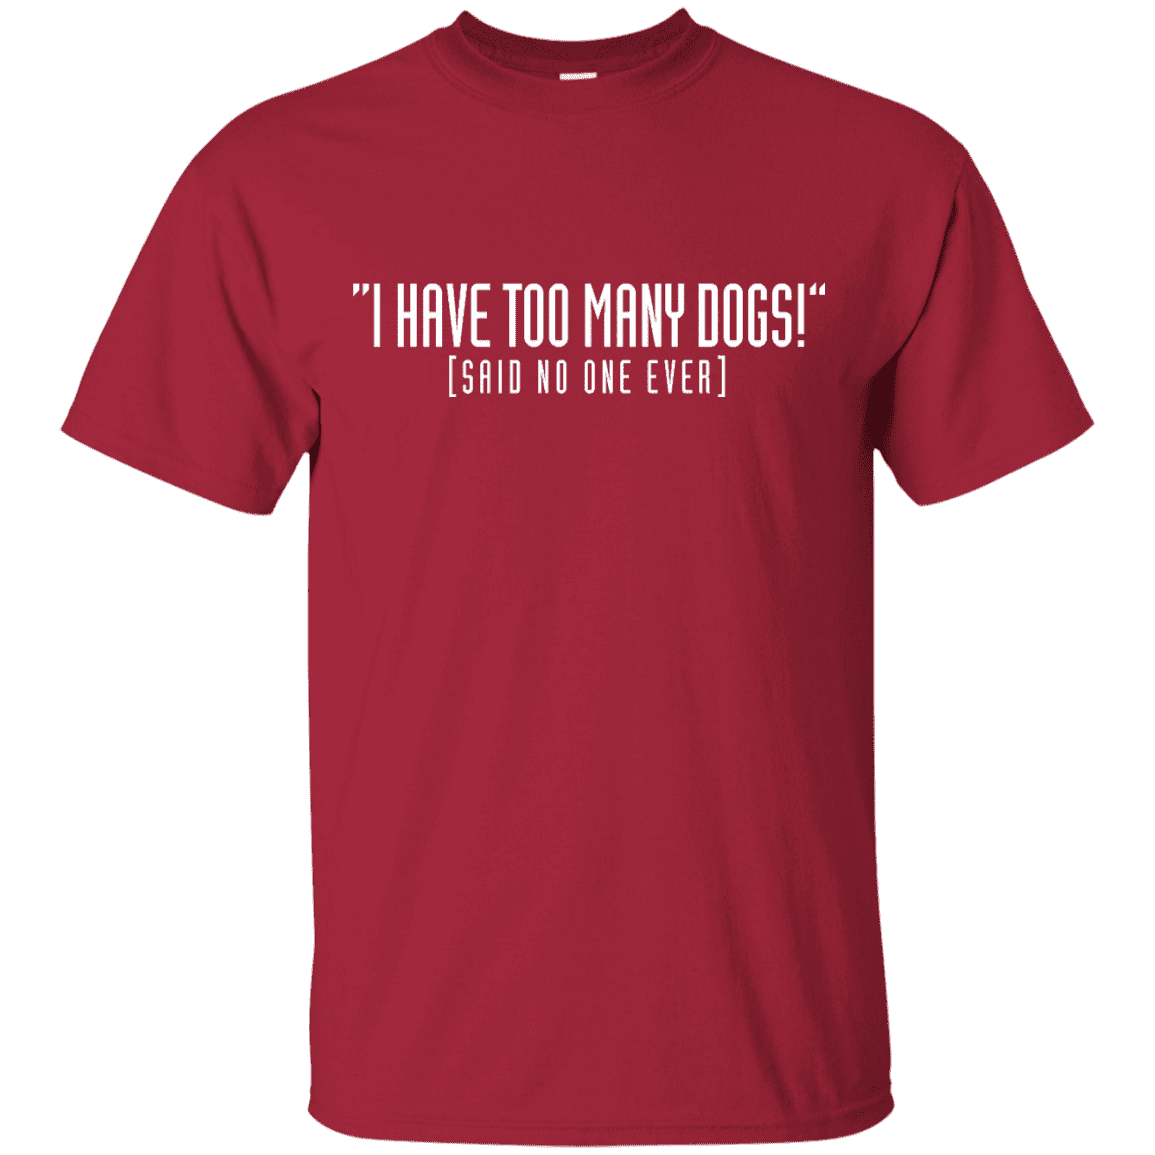 I Have Too Many Dogs - T Shirt.